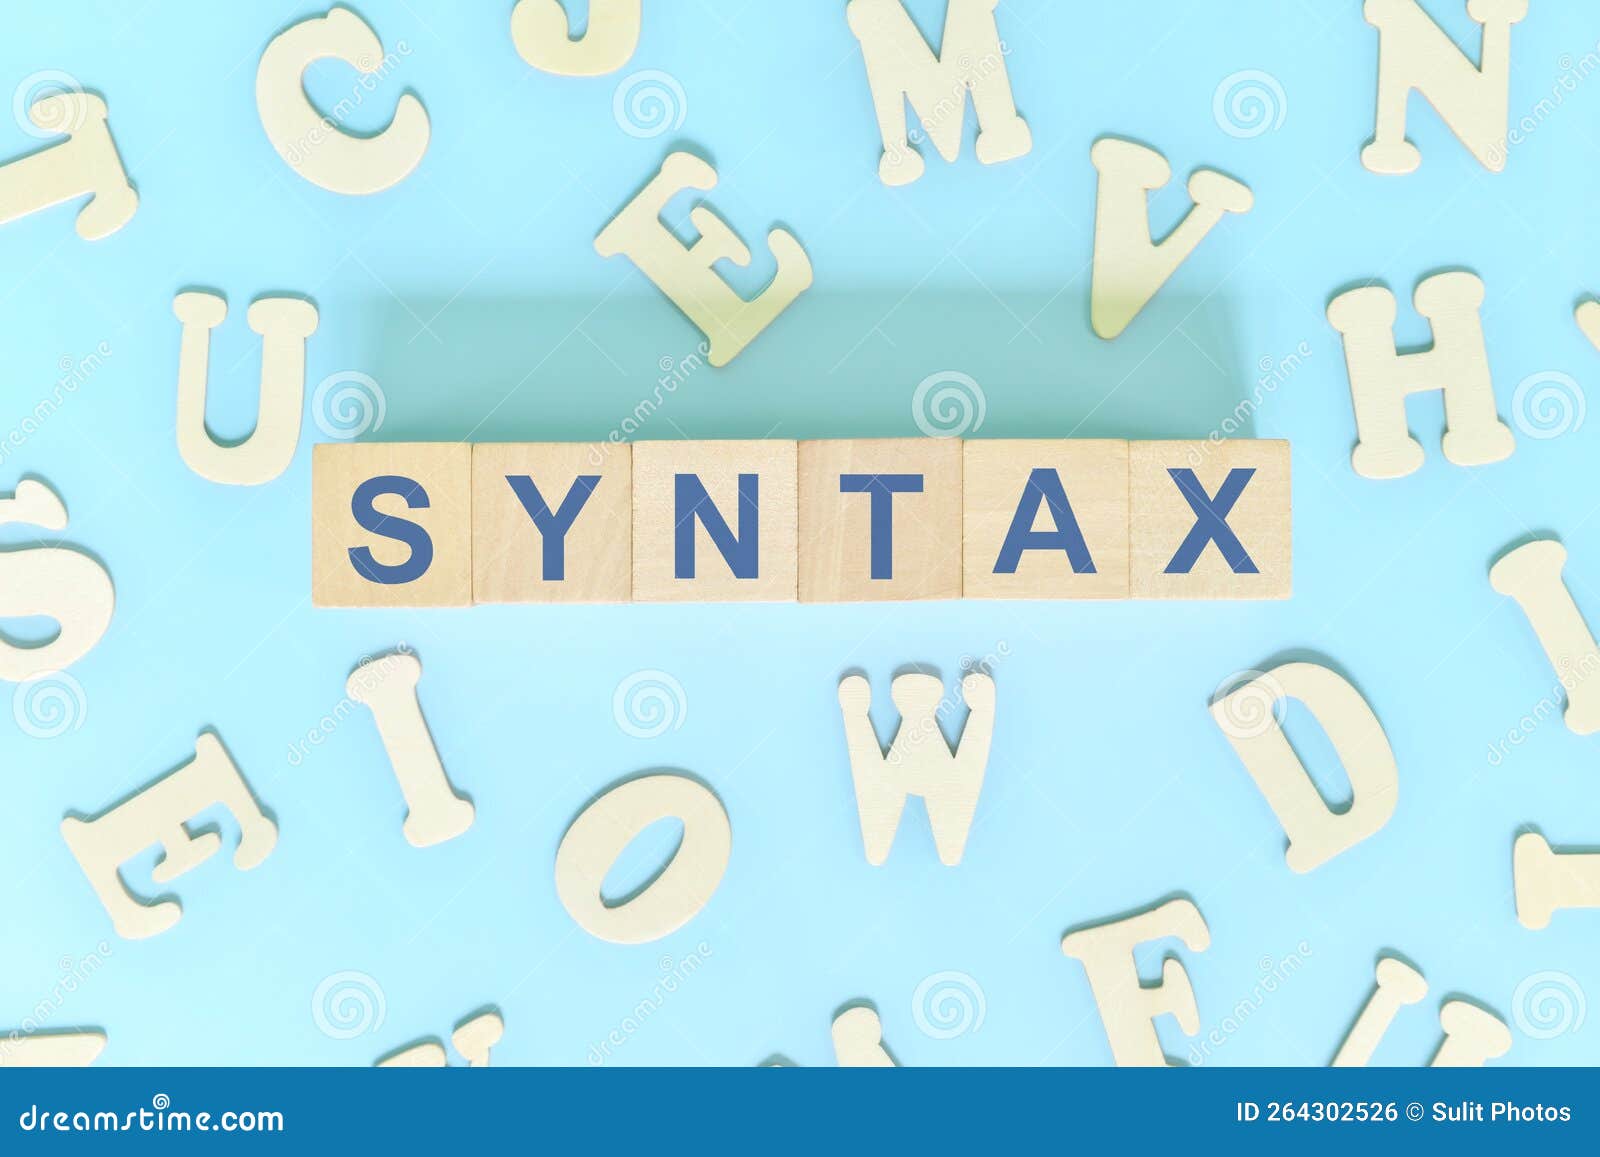 study syntax in linguistics concept. wooden blocks word typography flat lay in blue background.